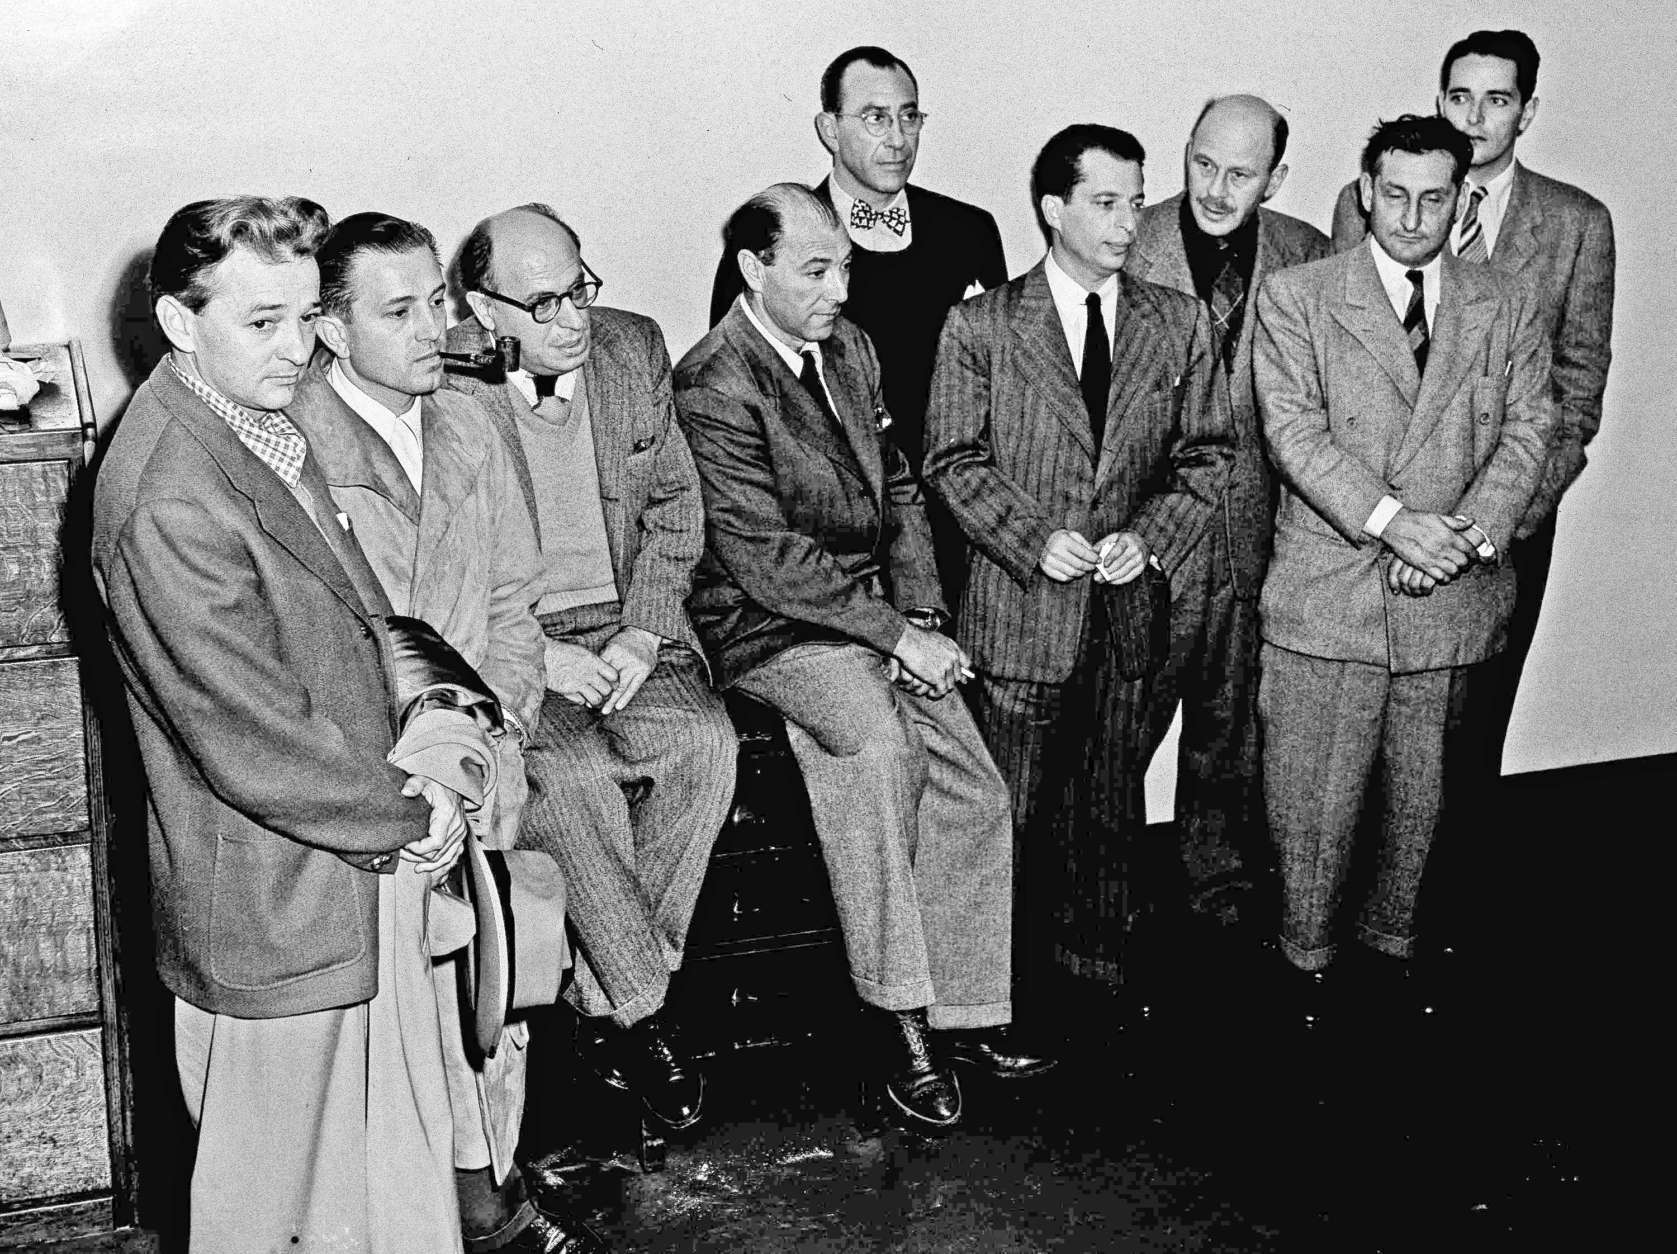 Nine of ten Hollywood writers, directors and producers, indicted by a Washington, D.C., grand jury on charges of contempt of Congress, surrender in a group at the U.S. Marshal's office in Los Angeles, Dec. 10, 1947. From left: Robert Adrian Scott, Edward Dmytryk, Samuel Ornitz, Lester Cole, Herbert Biberman, Albert Maltz, Alvah Bessie, John Howard Lawson and Ring Lardner Jr. The tenth, Dalton Trumbo, sent word he would surrender the following day. (AP Photo/Harold Filan)